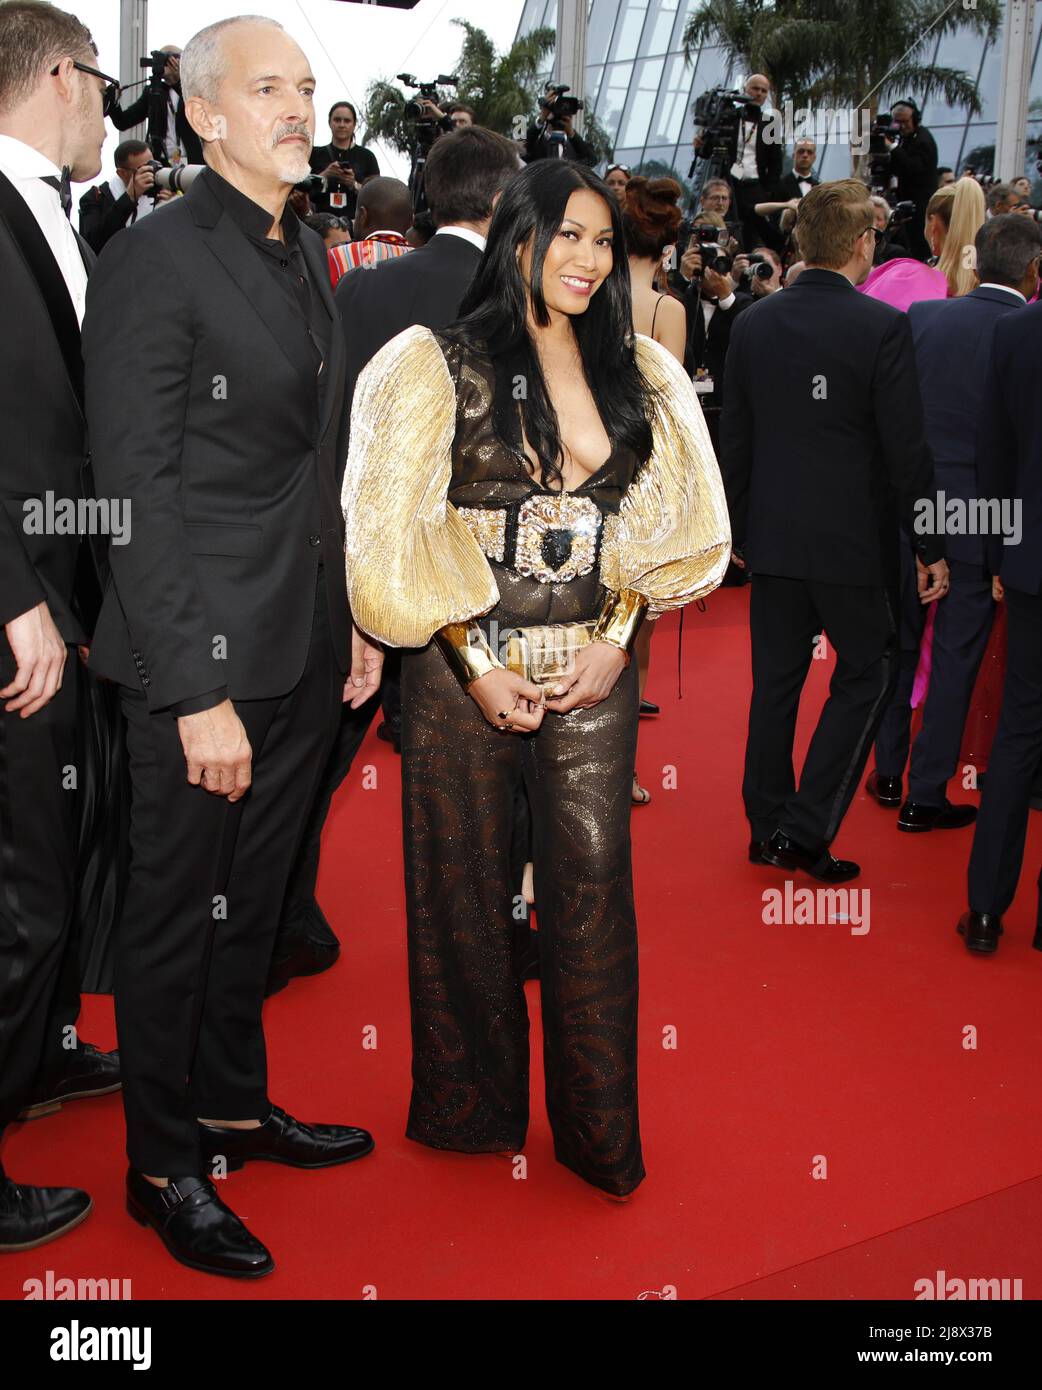 Cannes, France. 18th May, 2022. Anggun attends the screening of 'Top Gun: Maverick' during the 75th annual Cannes film festival at Palais des Festivals on May 18, 2022 in Cannes, France. Photo: DGP/imageSPACE/Sipa USA Credit: Sipa USA/Alamy Live News Stock Photo